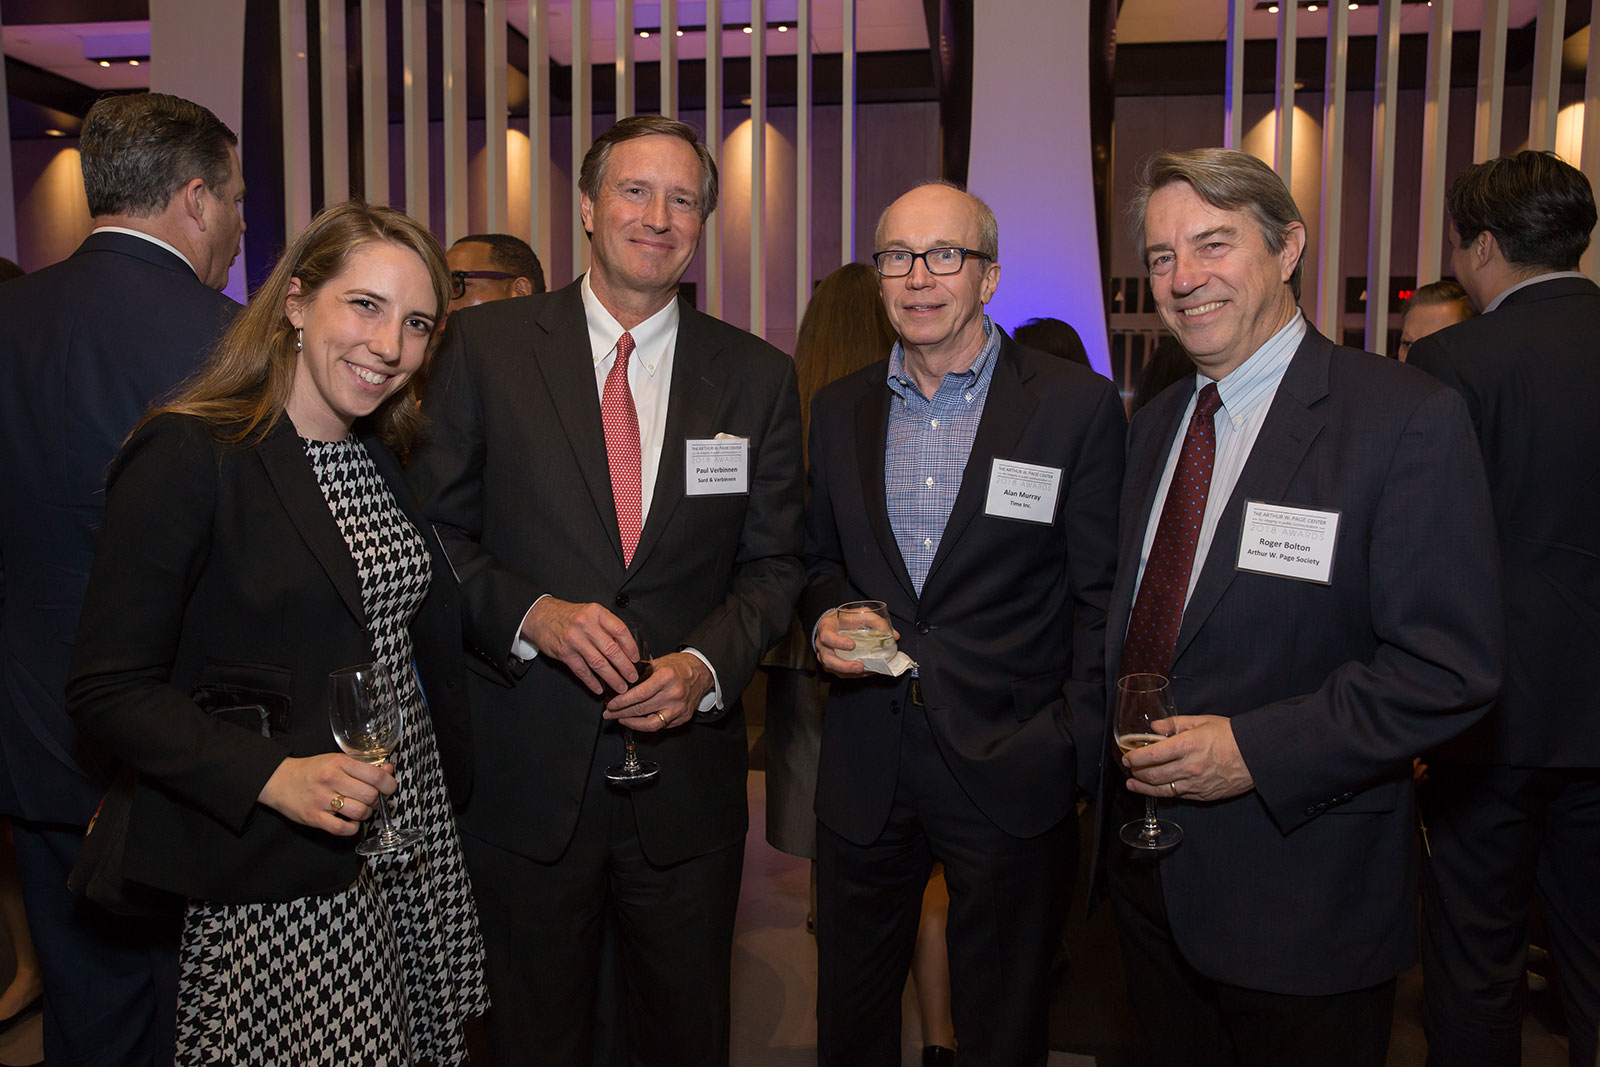 (Left to right) Taylor Bolton, Paul Verbinnen, 2017 honoree Alan Murray and advisory board member Roger Bolton chat during the Page Center Awards cocktail hour.